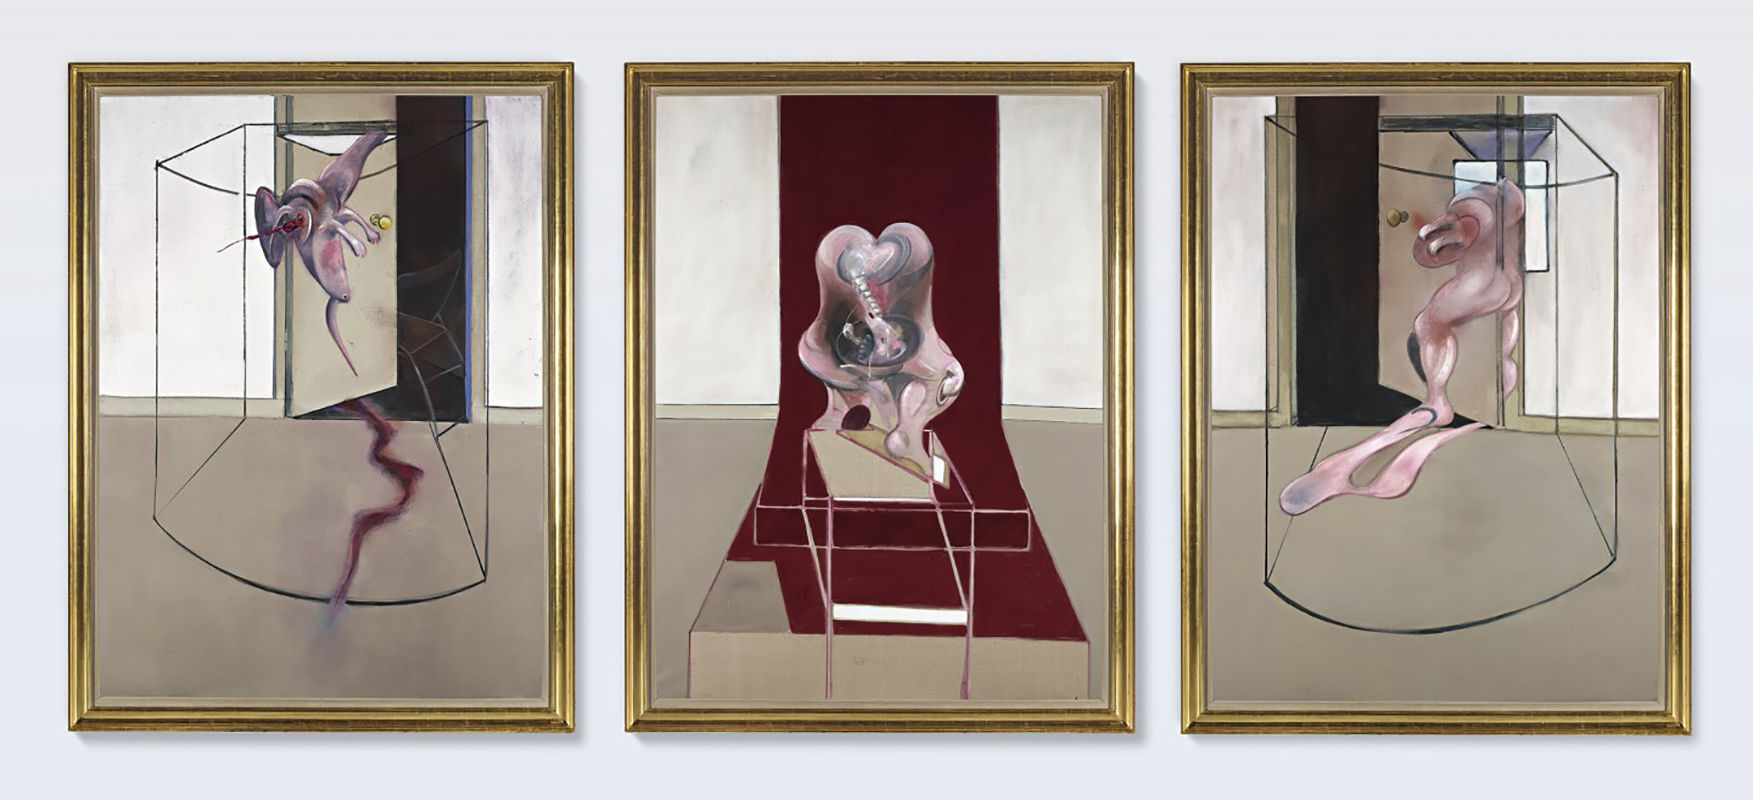 Francis Bacon triptych hitting the auction block at Sotheby’s in May